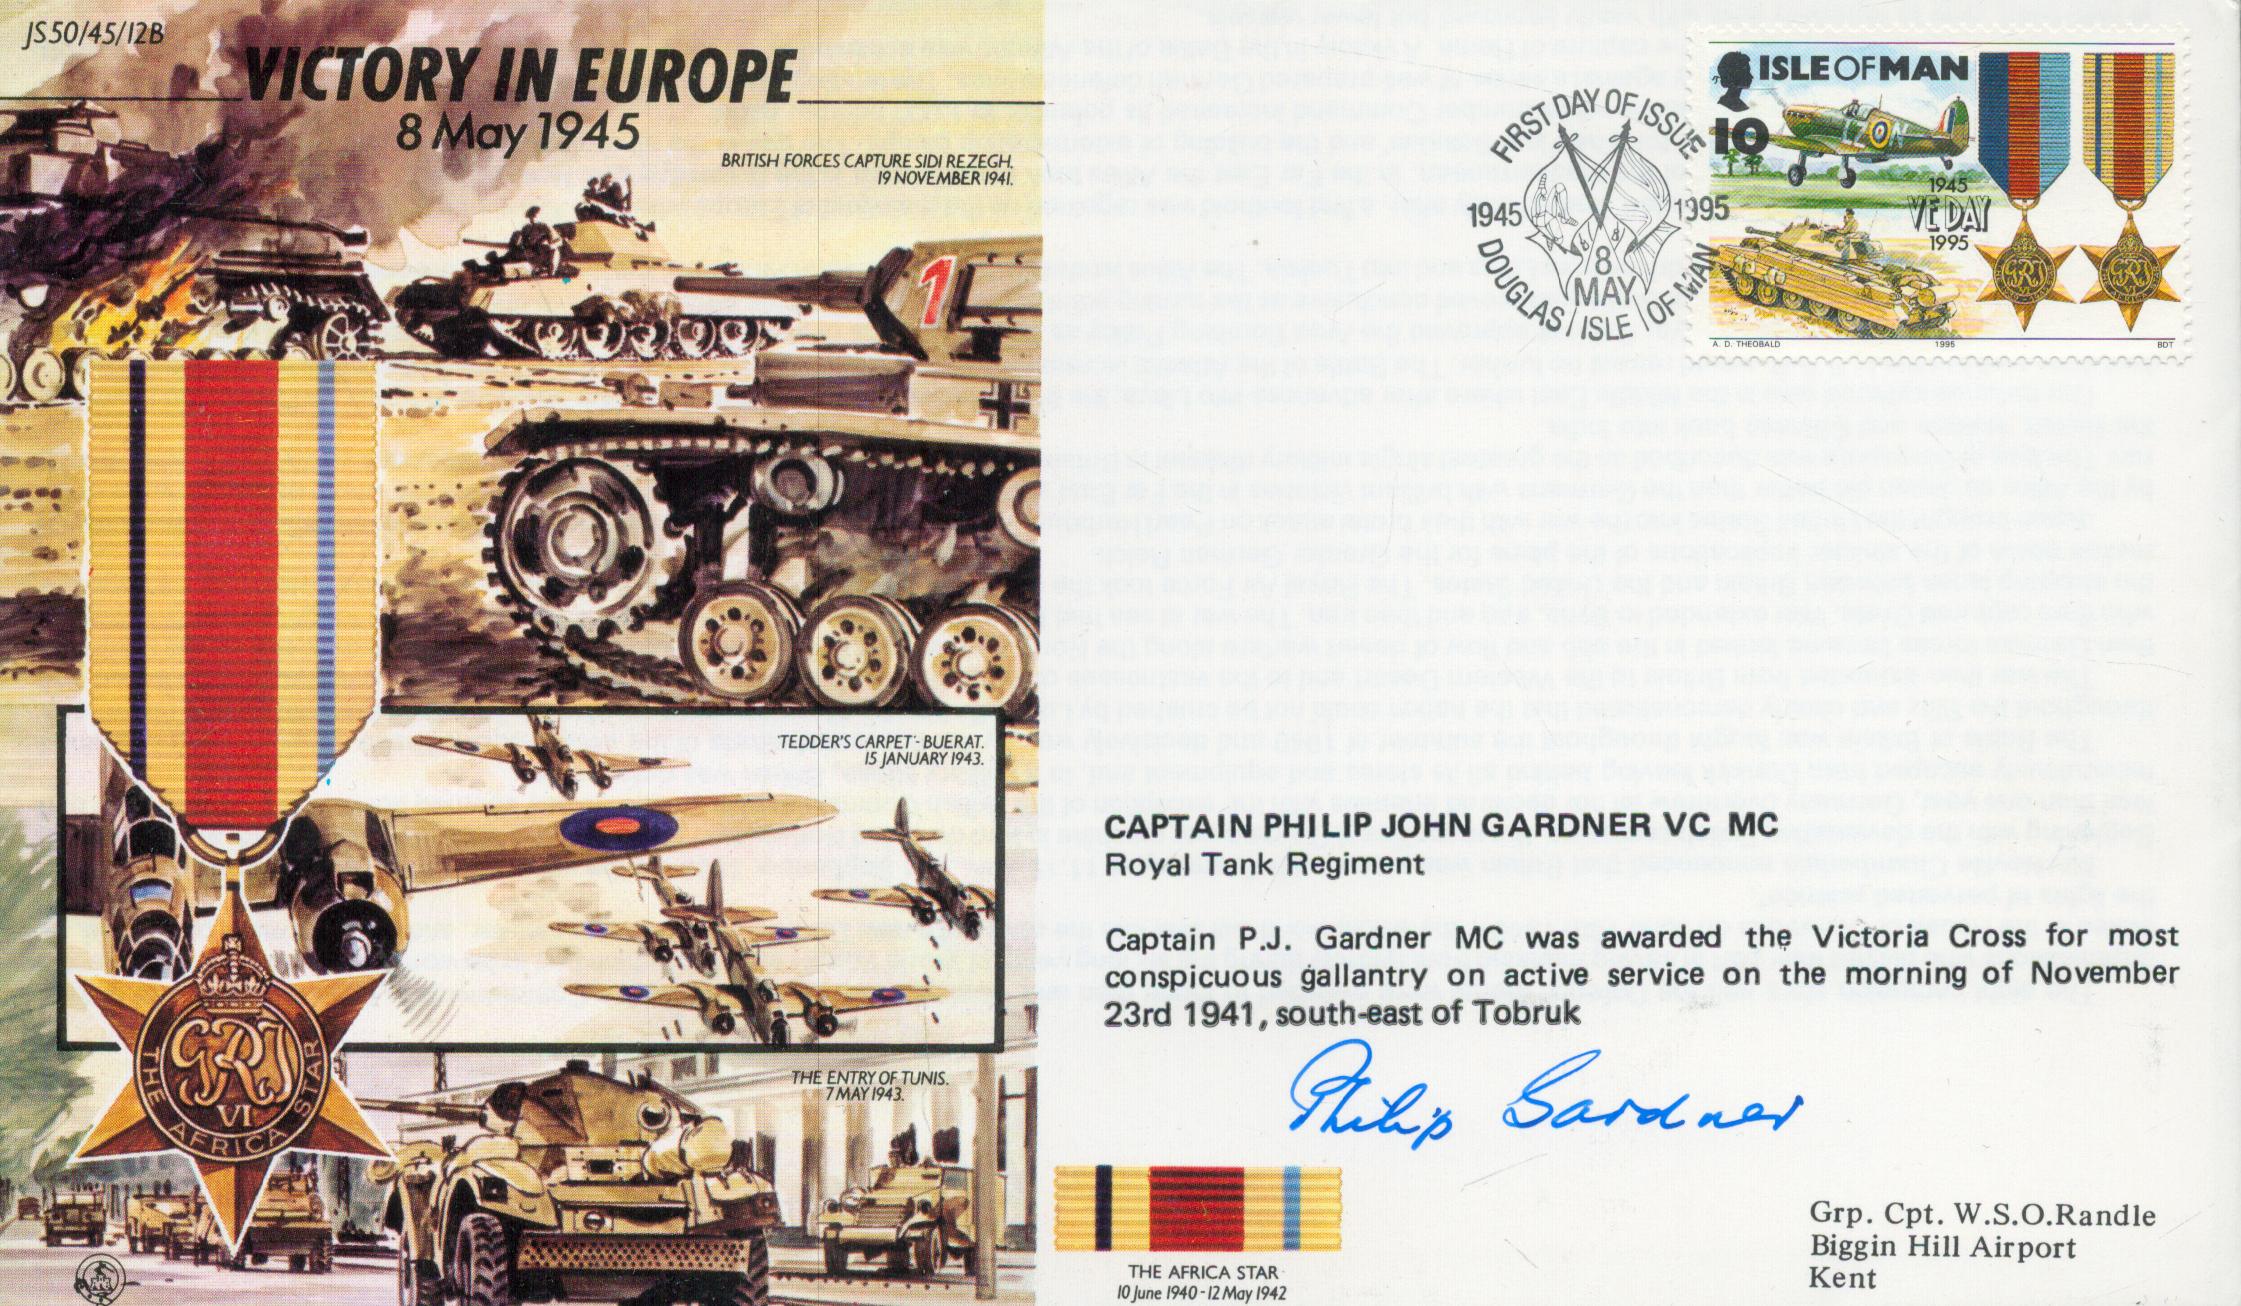 Capt Phillip Gardner VC signed 50th ann WW2 cover Victory in Europe JS50/45/12B. Limited edition